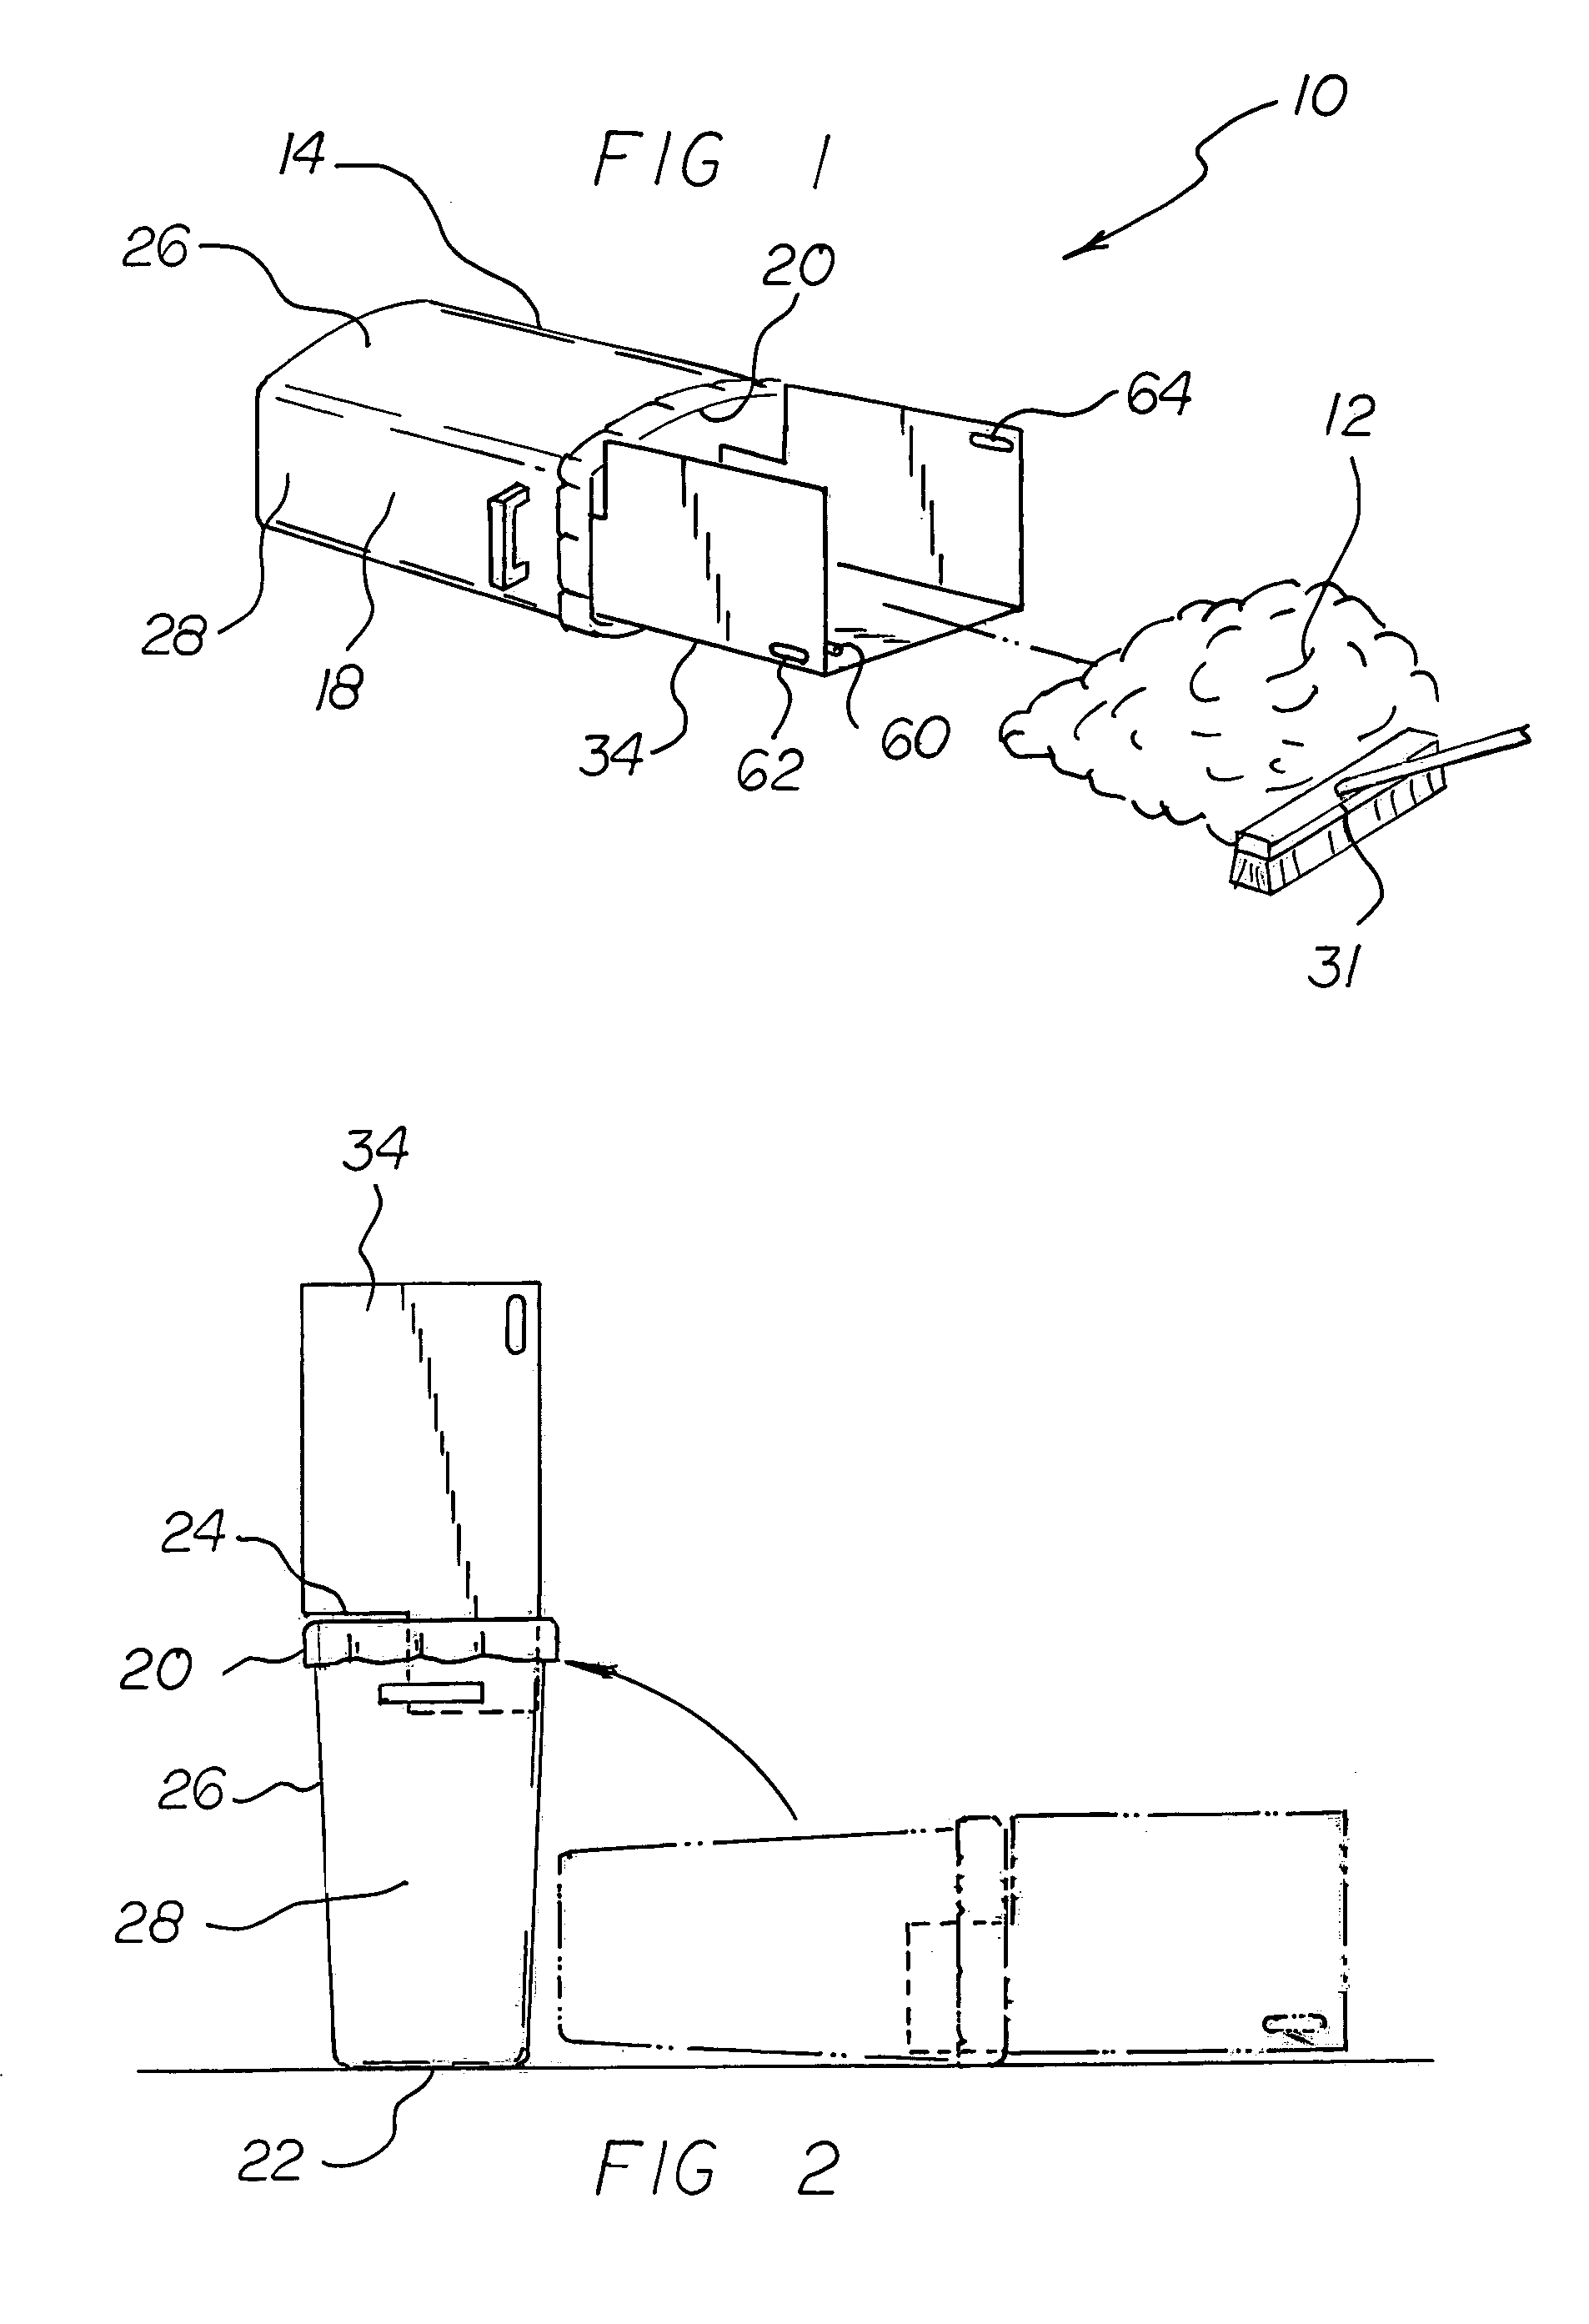 Leaf collecting system